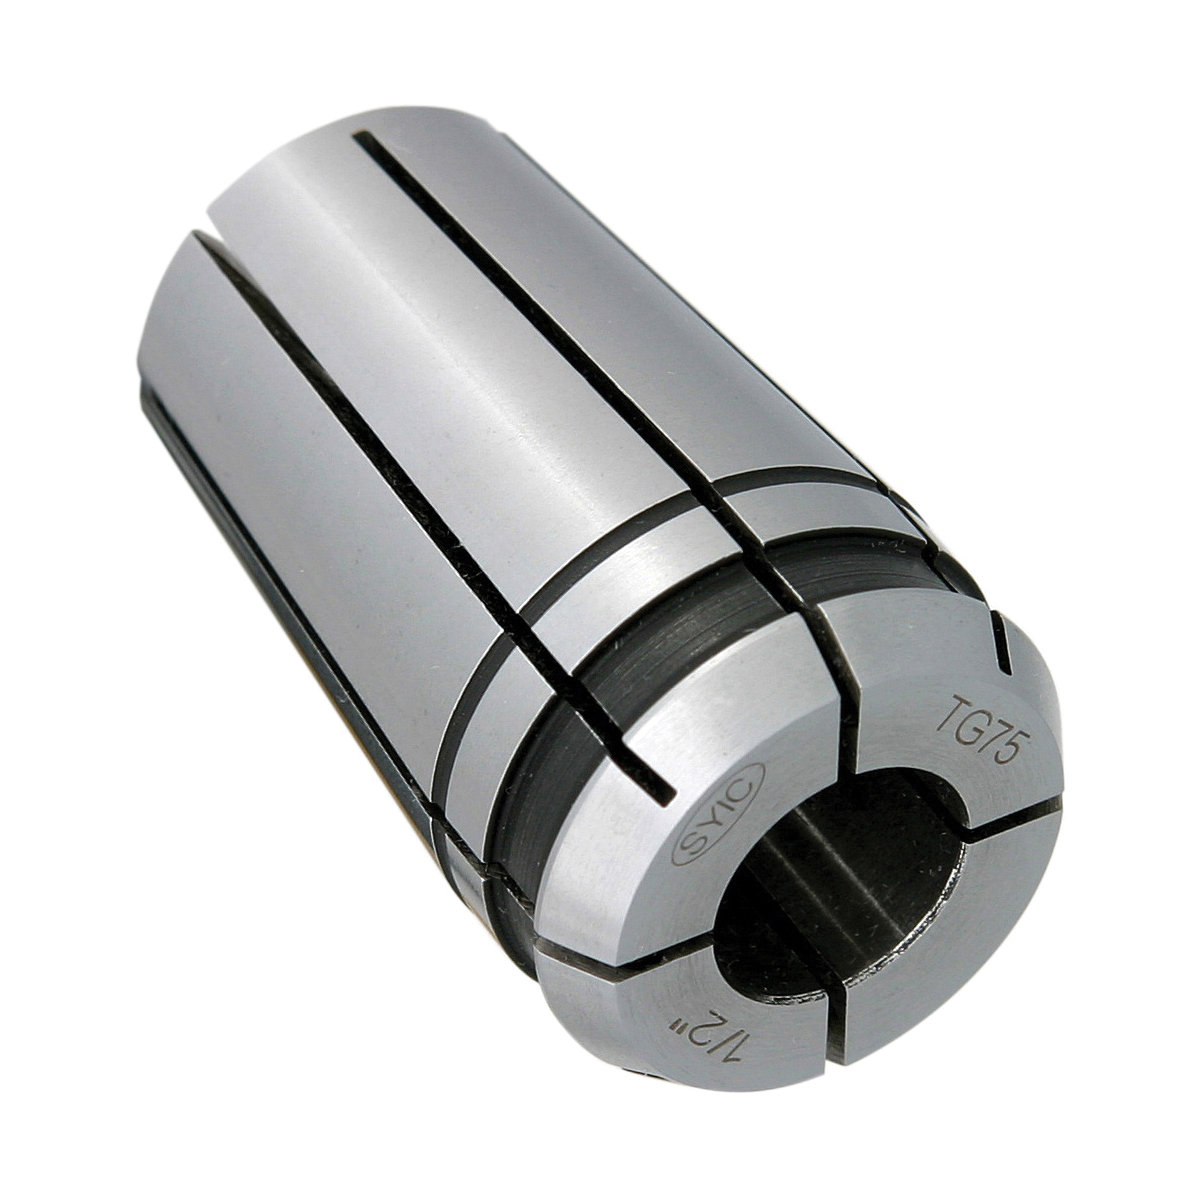 TG75 1/4" COLLET